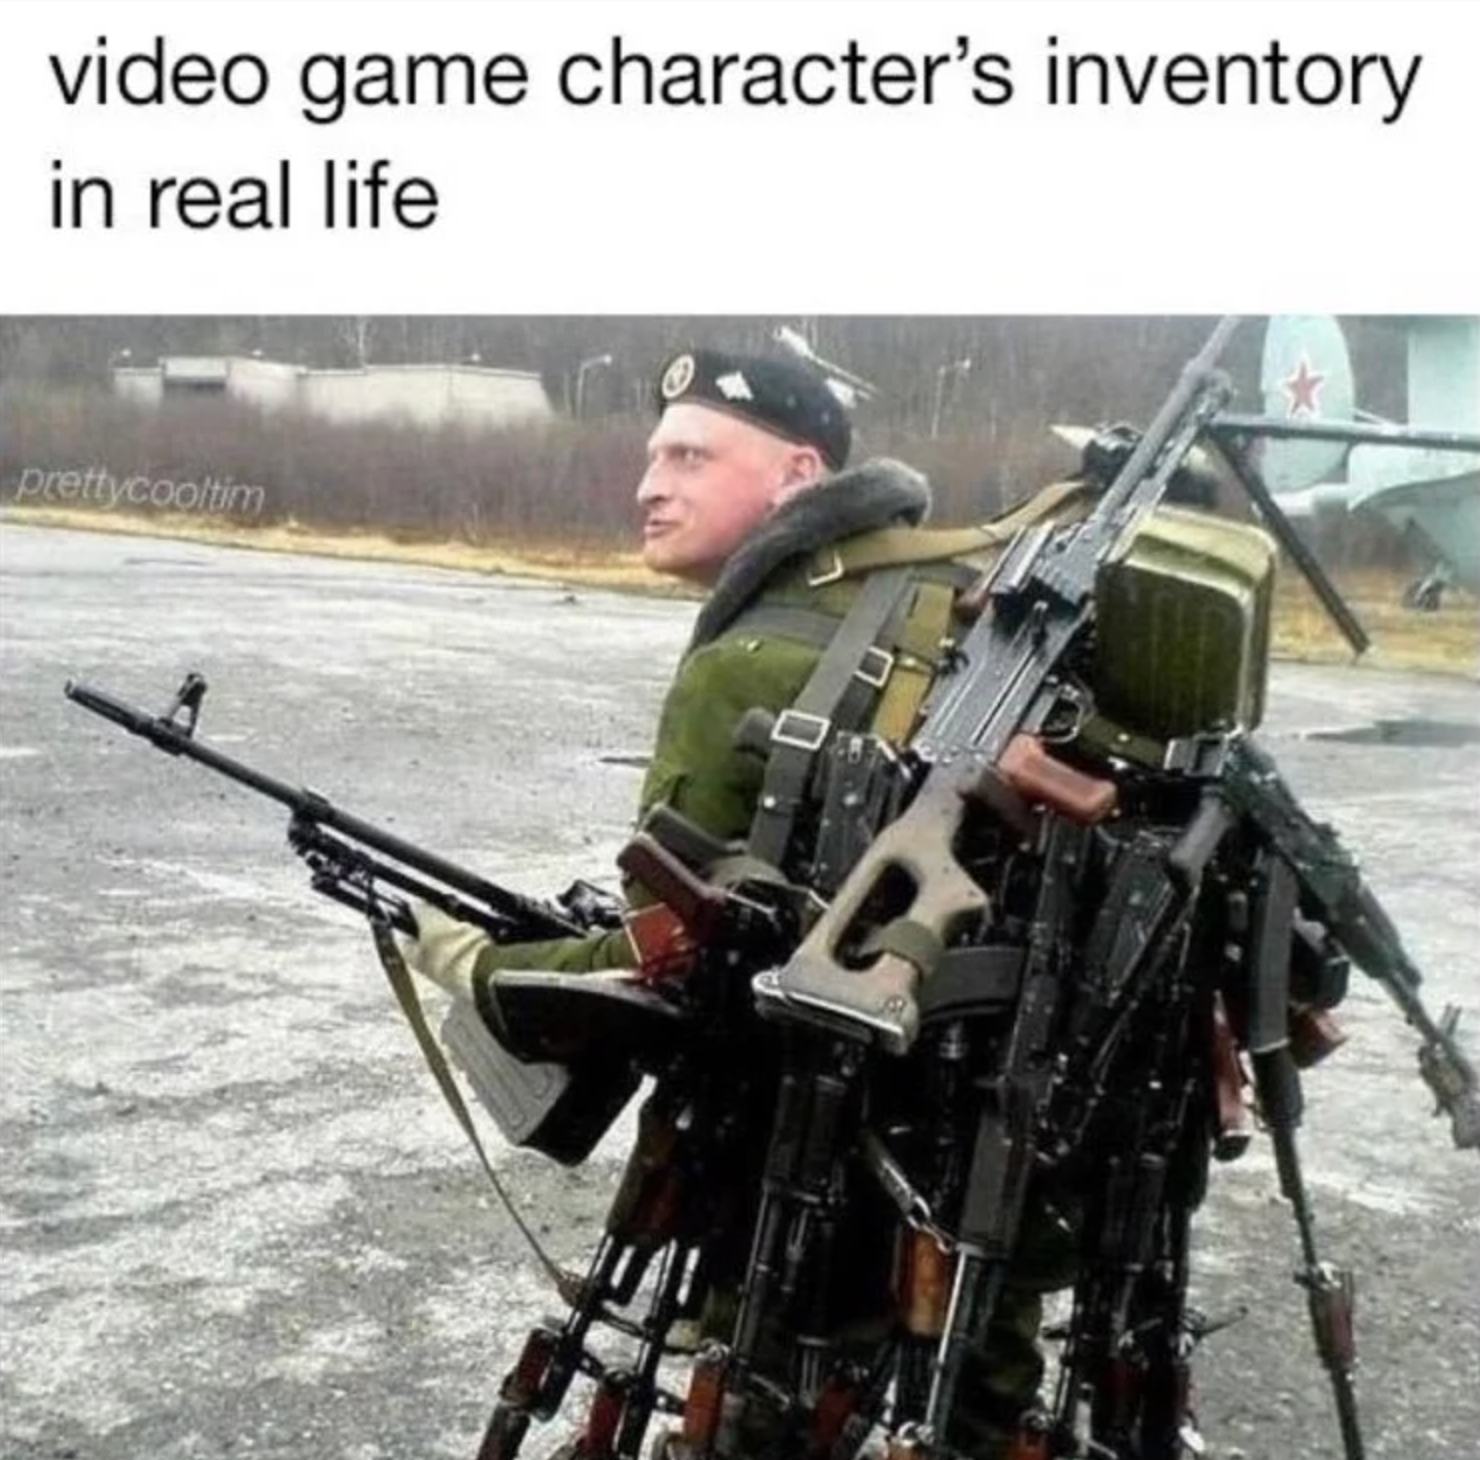 gaming memes and pics - putin ivan meme - video game character's inventory in real life pretty cooltim